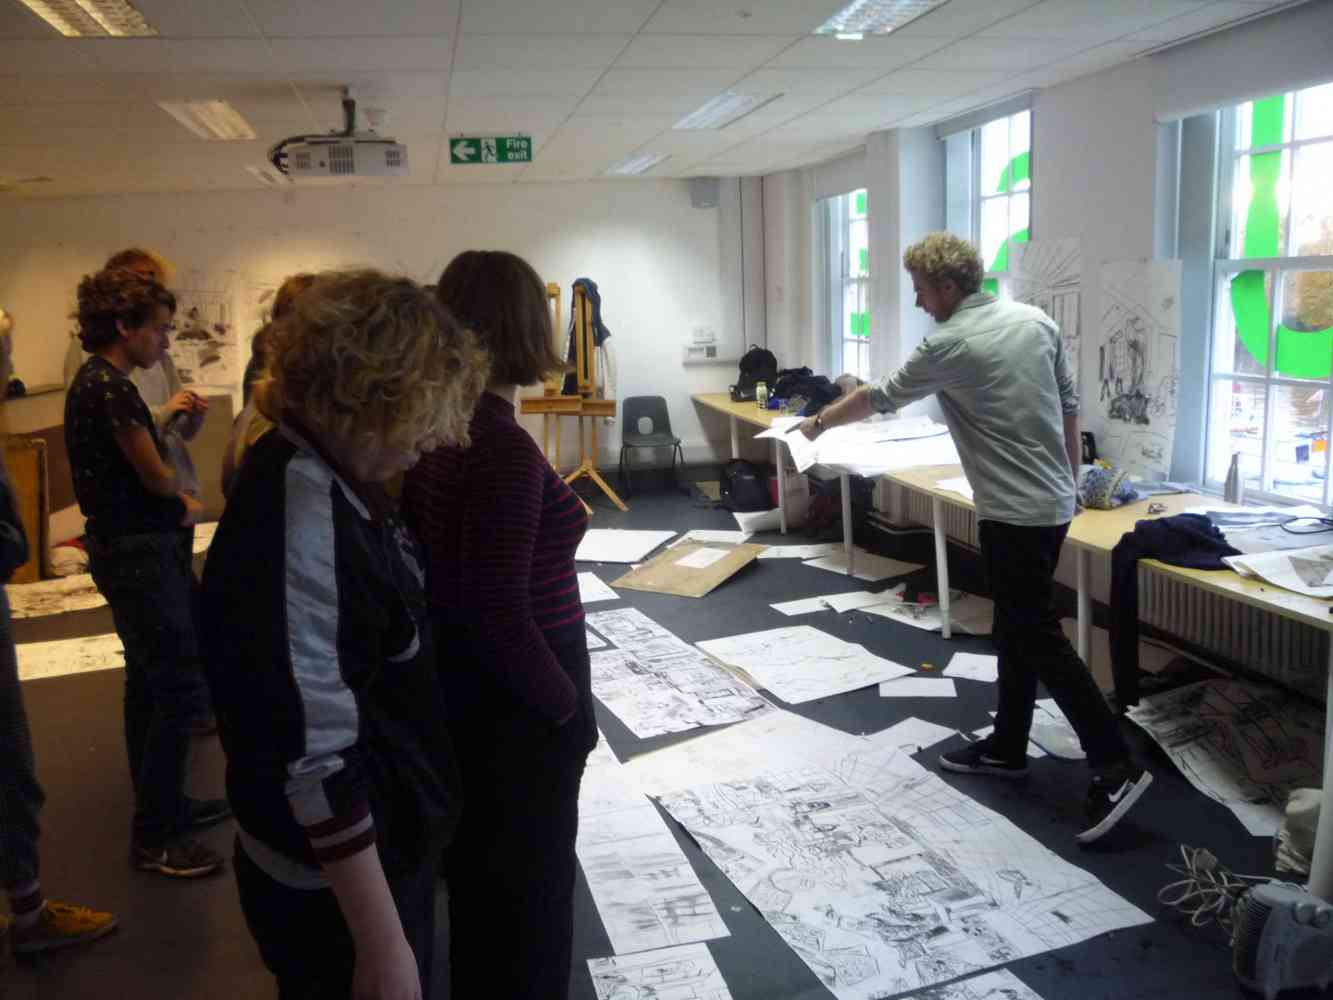 Josh Armitage leading a scale drawing class - Josh Armitage giving end of session reviews to works made by students